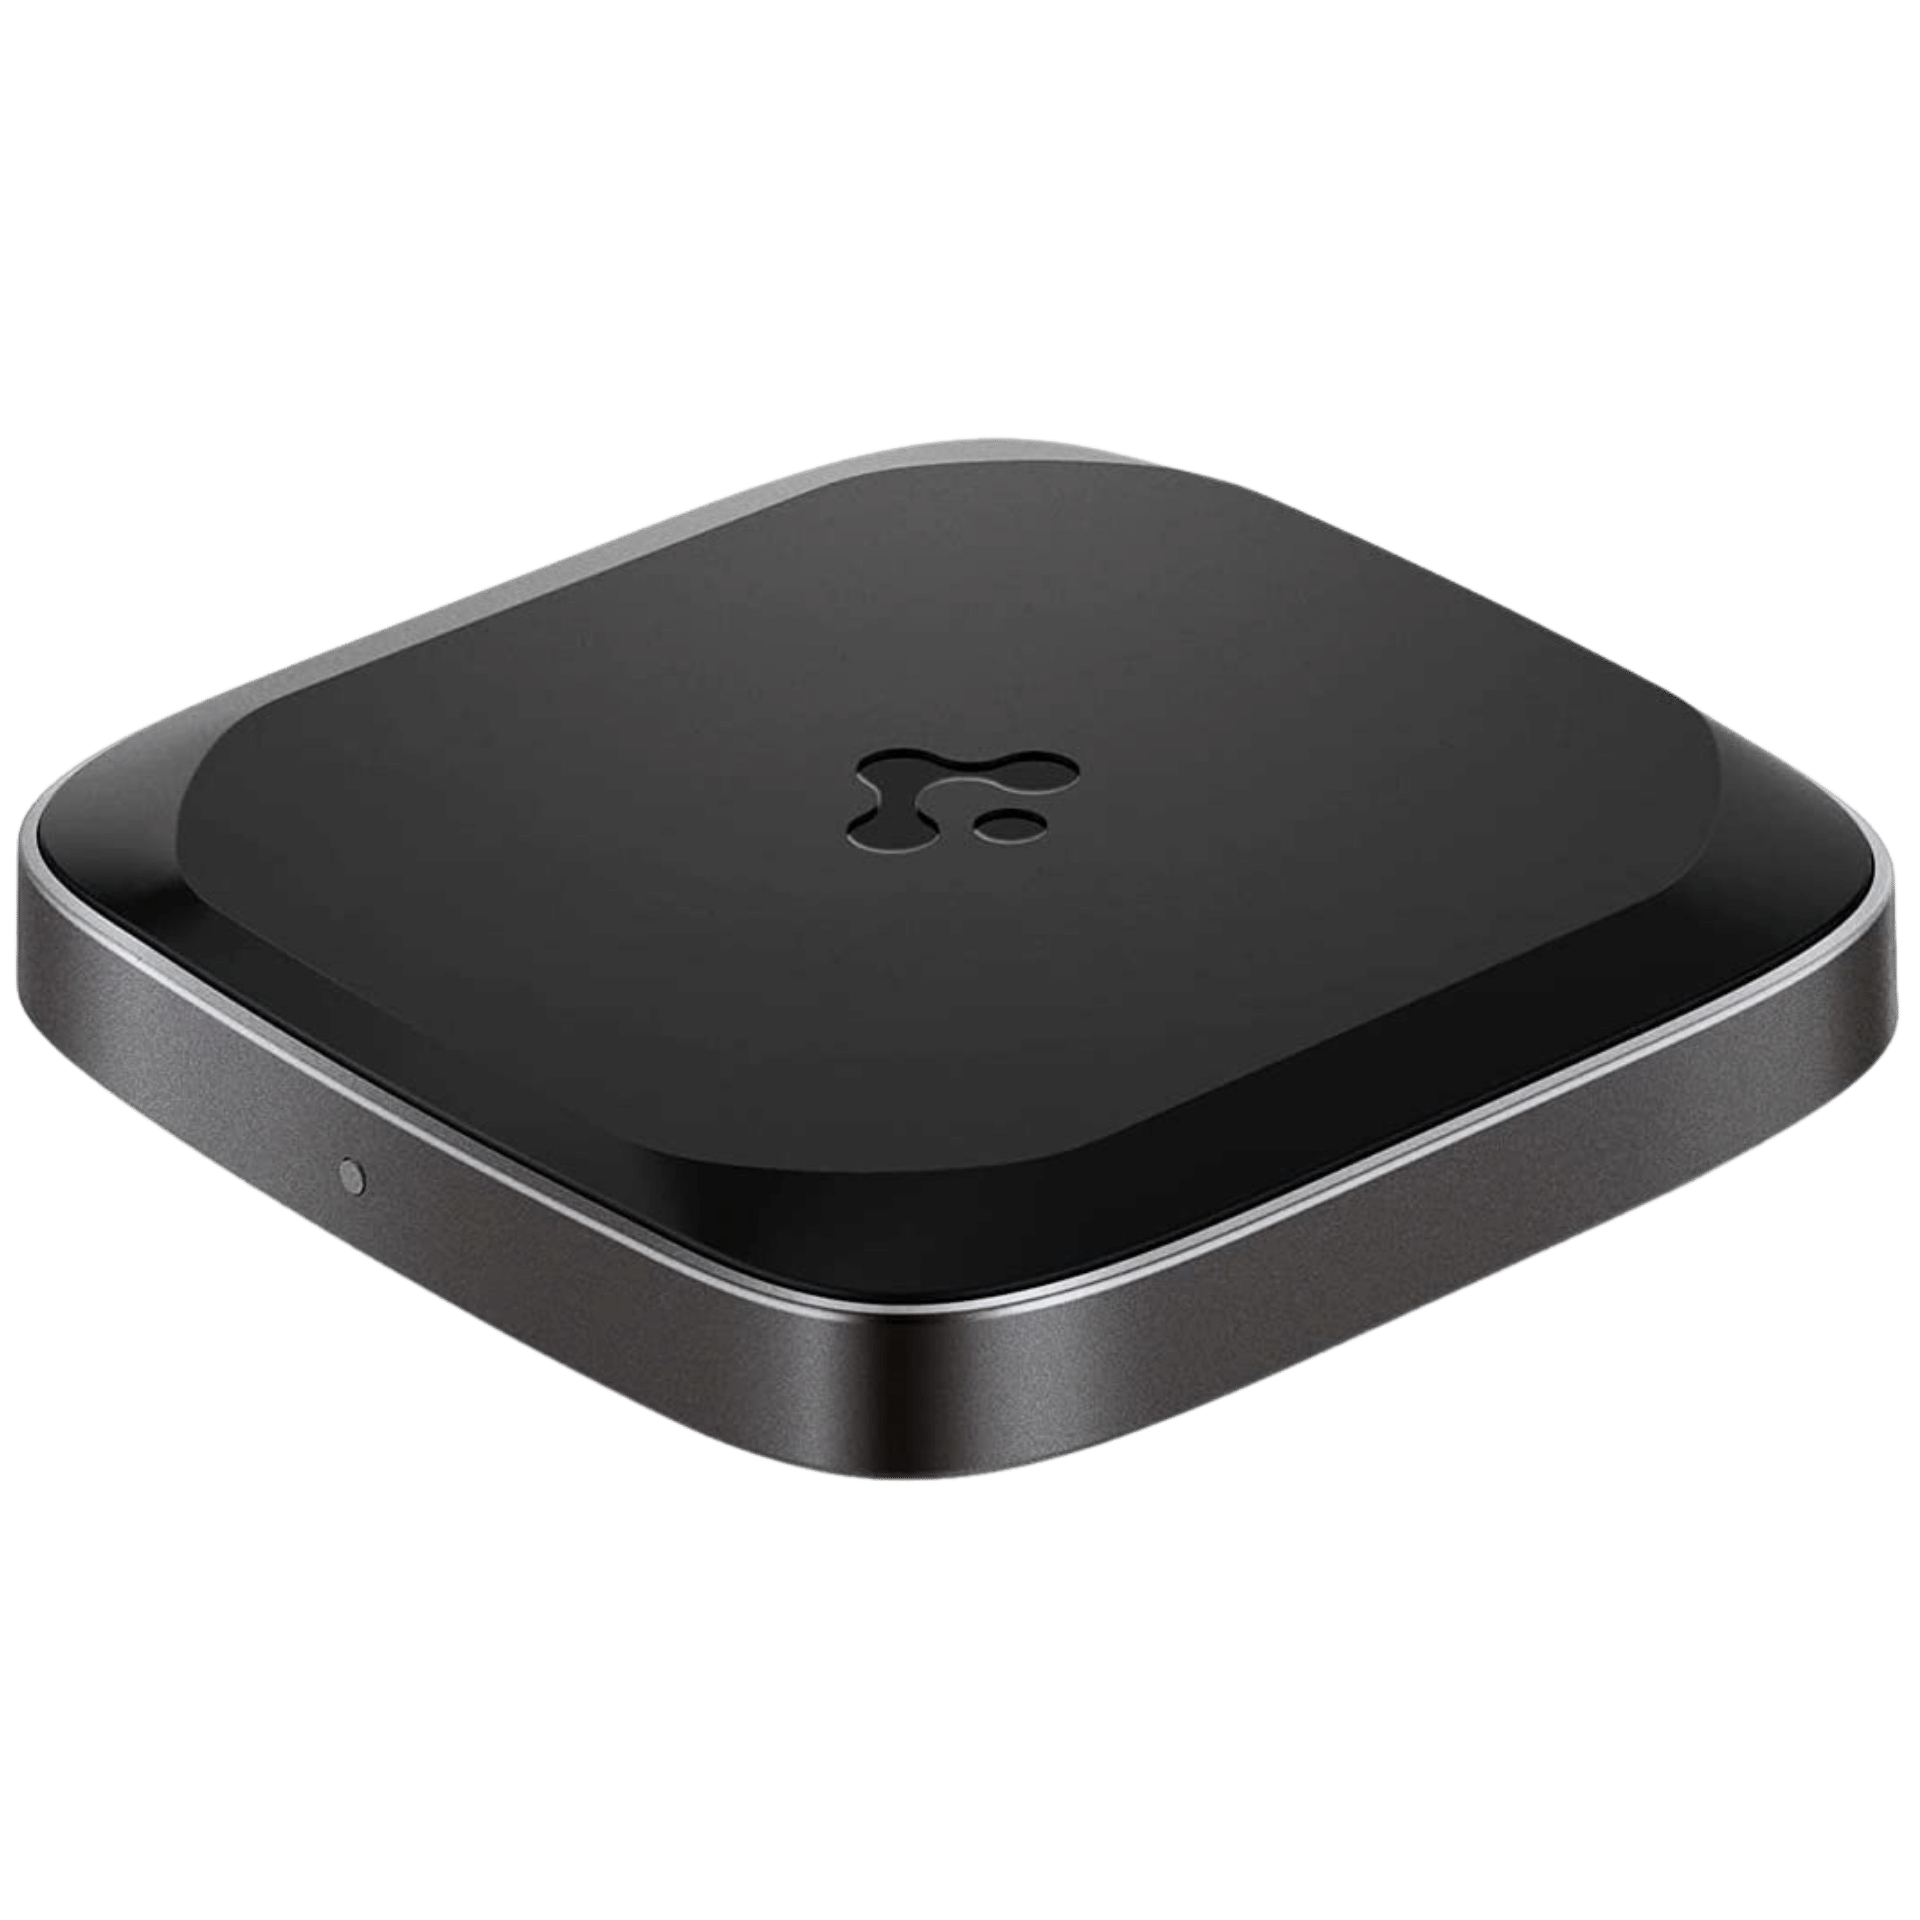 Product Image of Spigen ArcField Wireless Charger